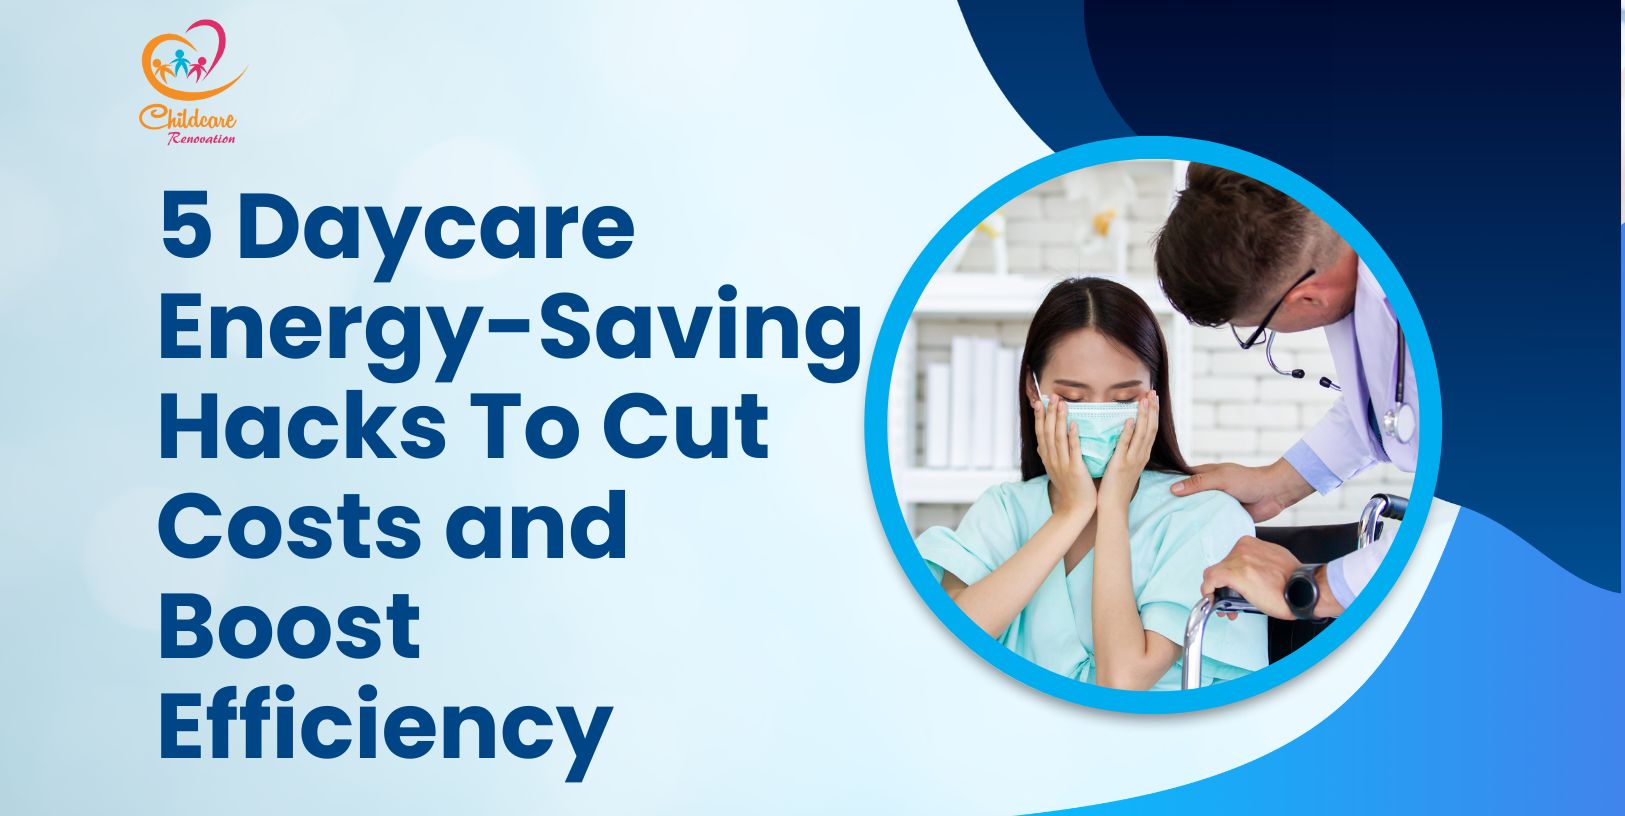 5 Daycare Energy-Saving Hacks To Cut Costs and Boost Efficiency